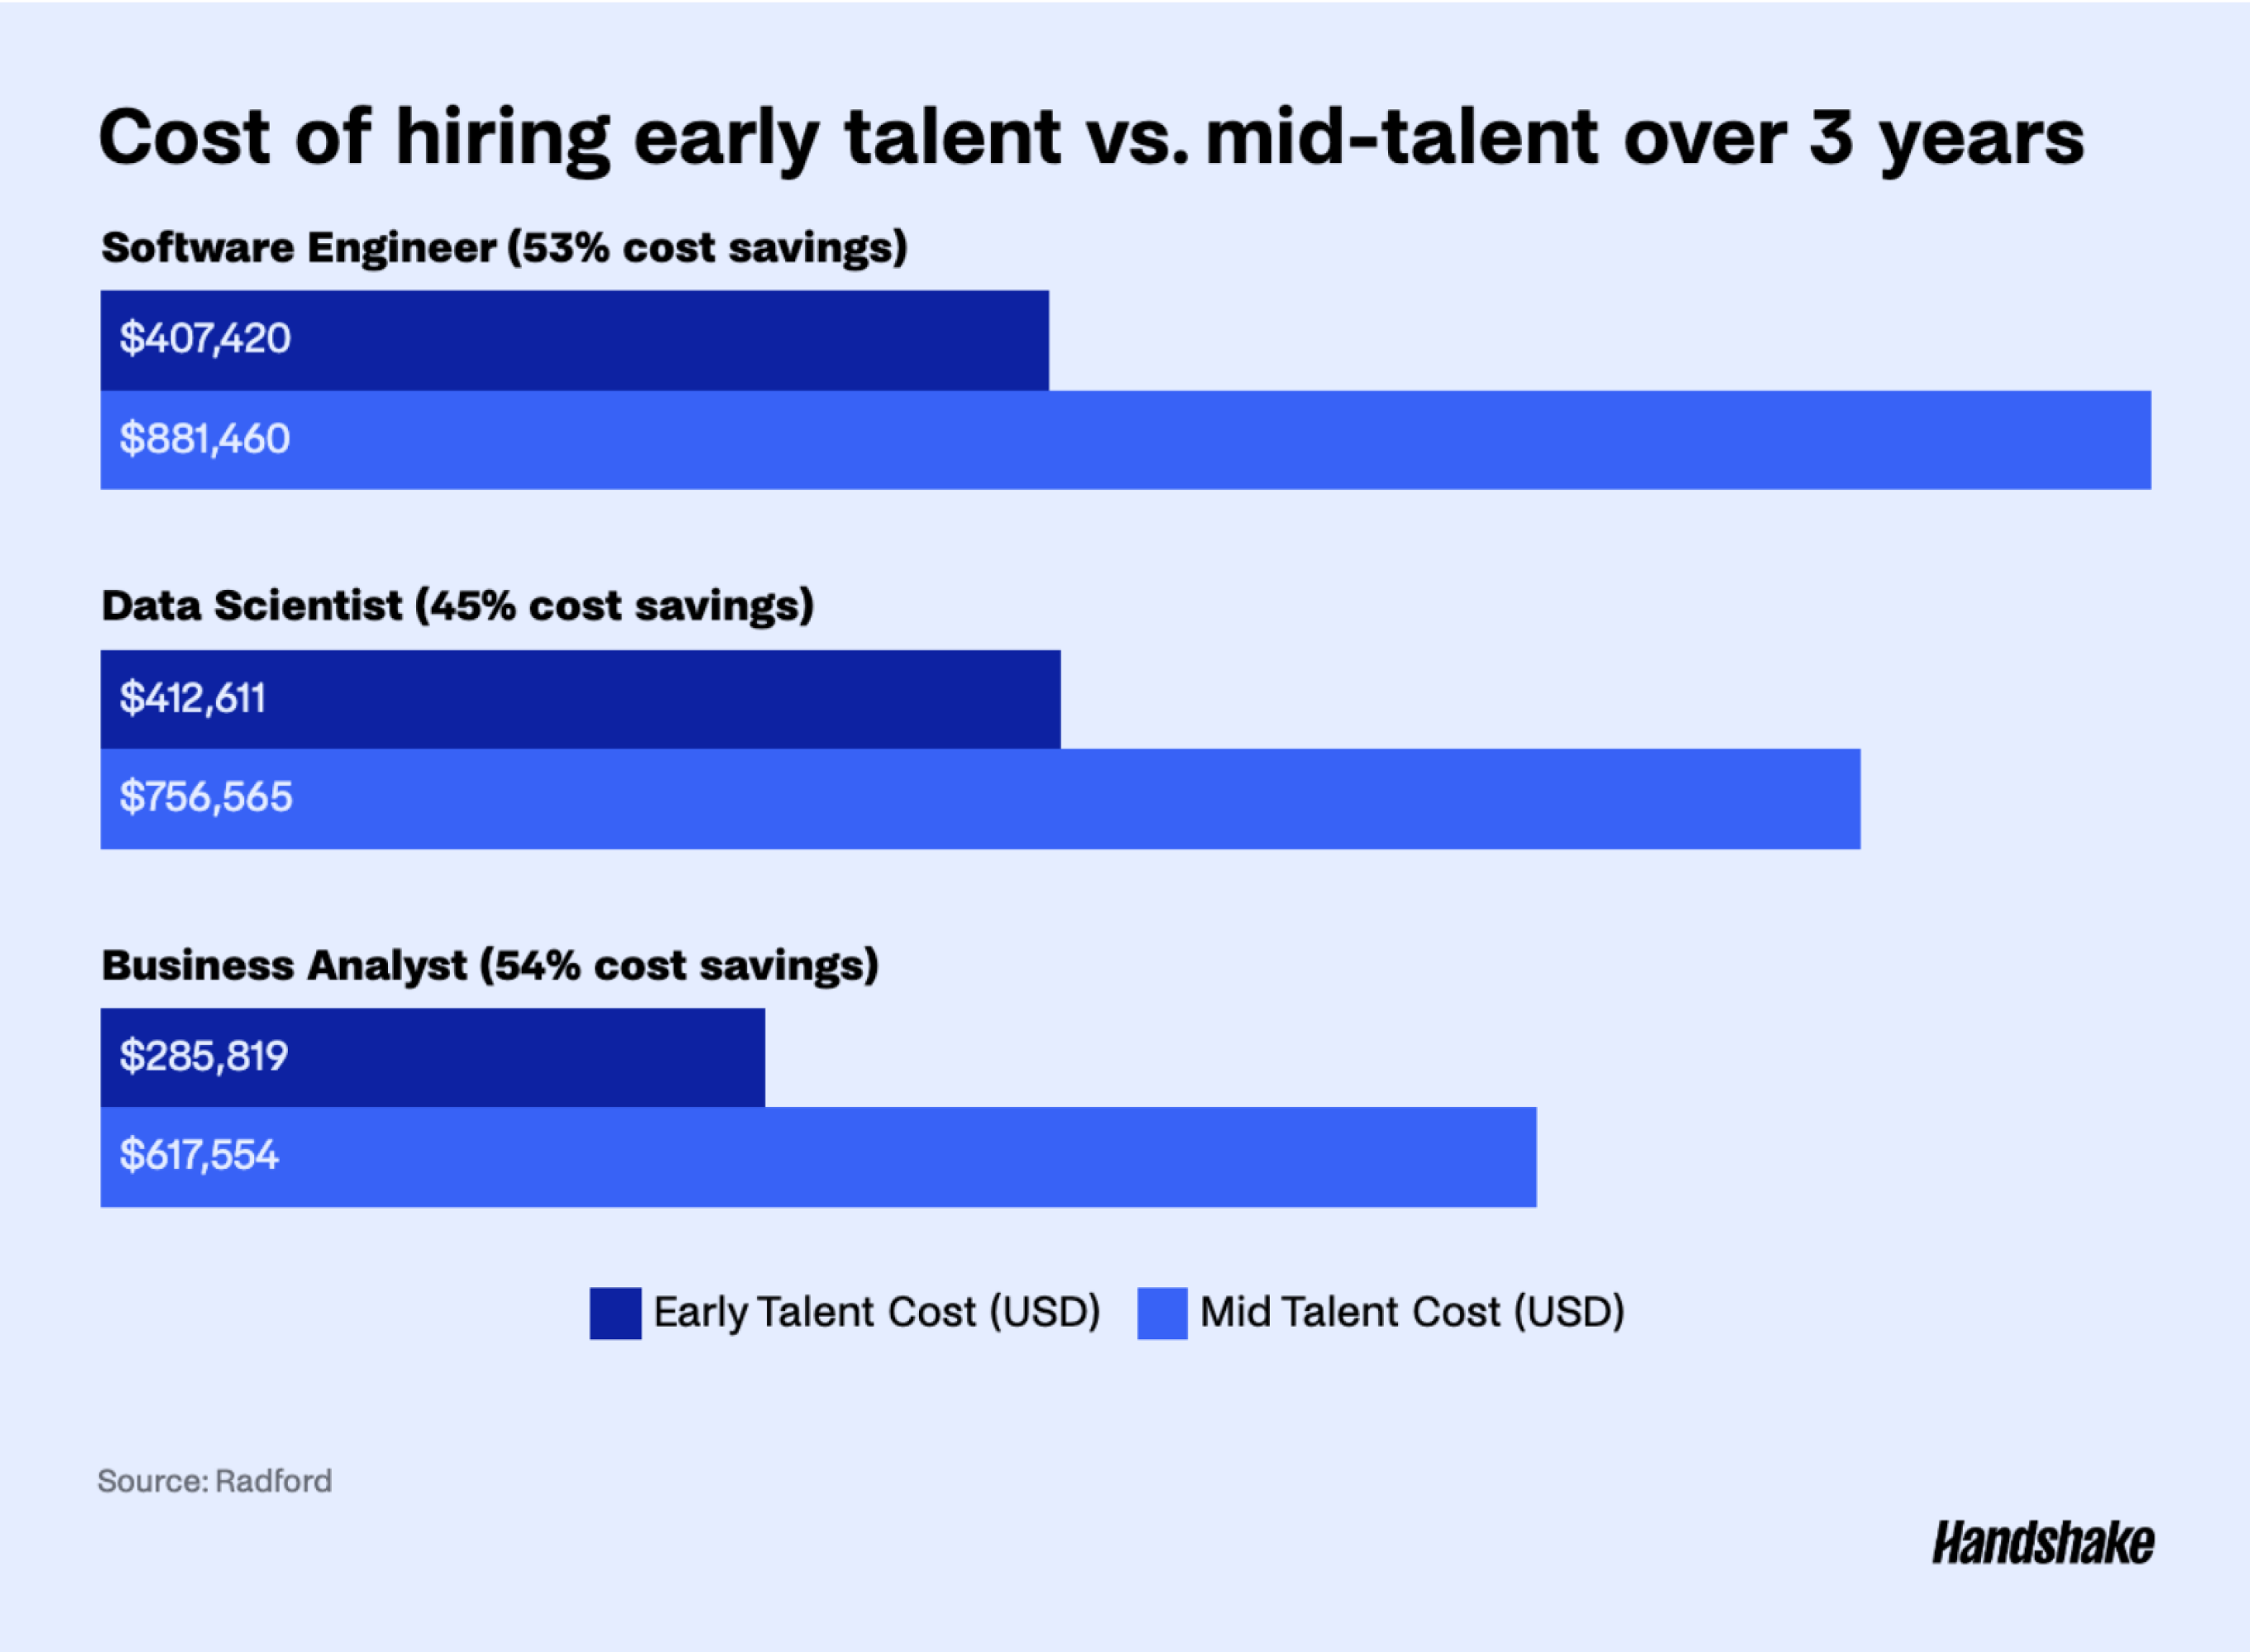 cost of hiring early talent vs mid-talent over 3 years